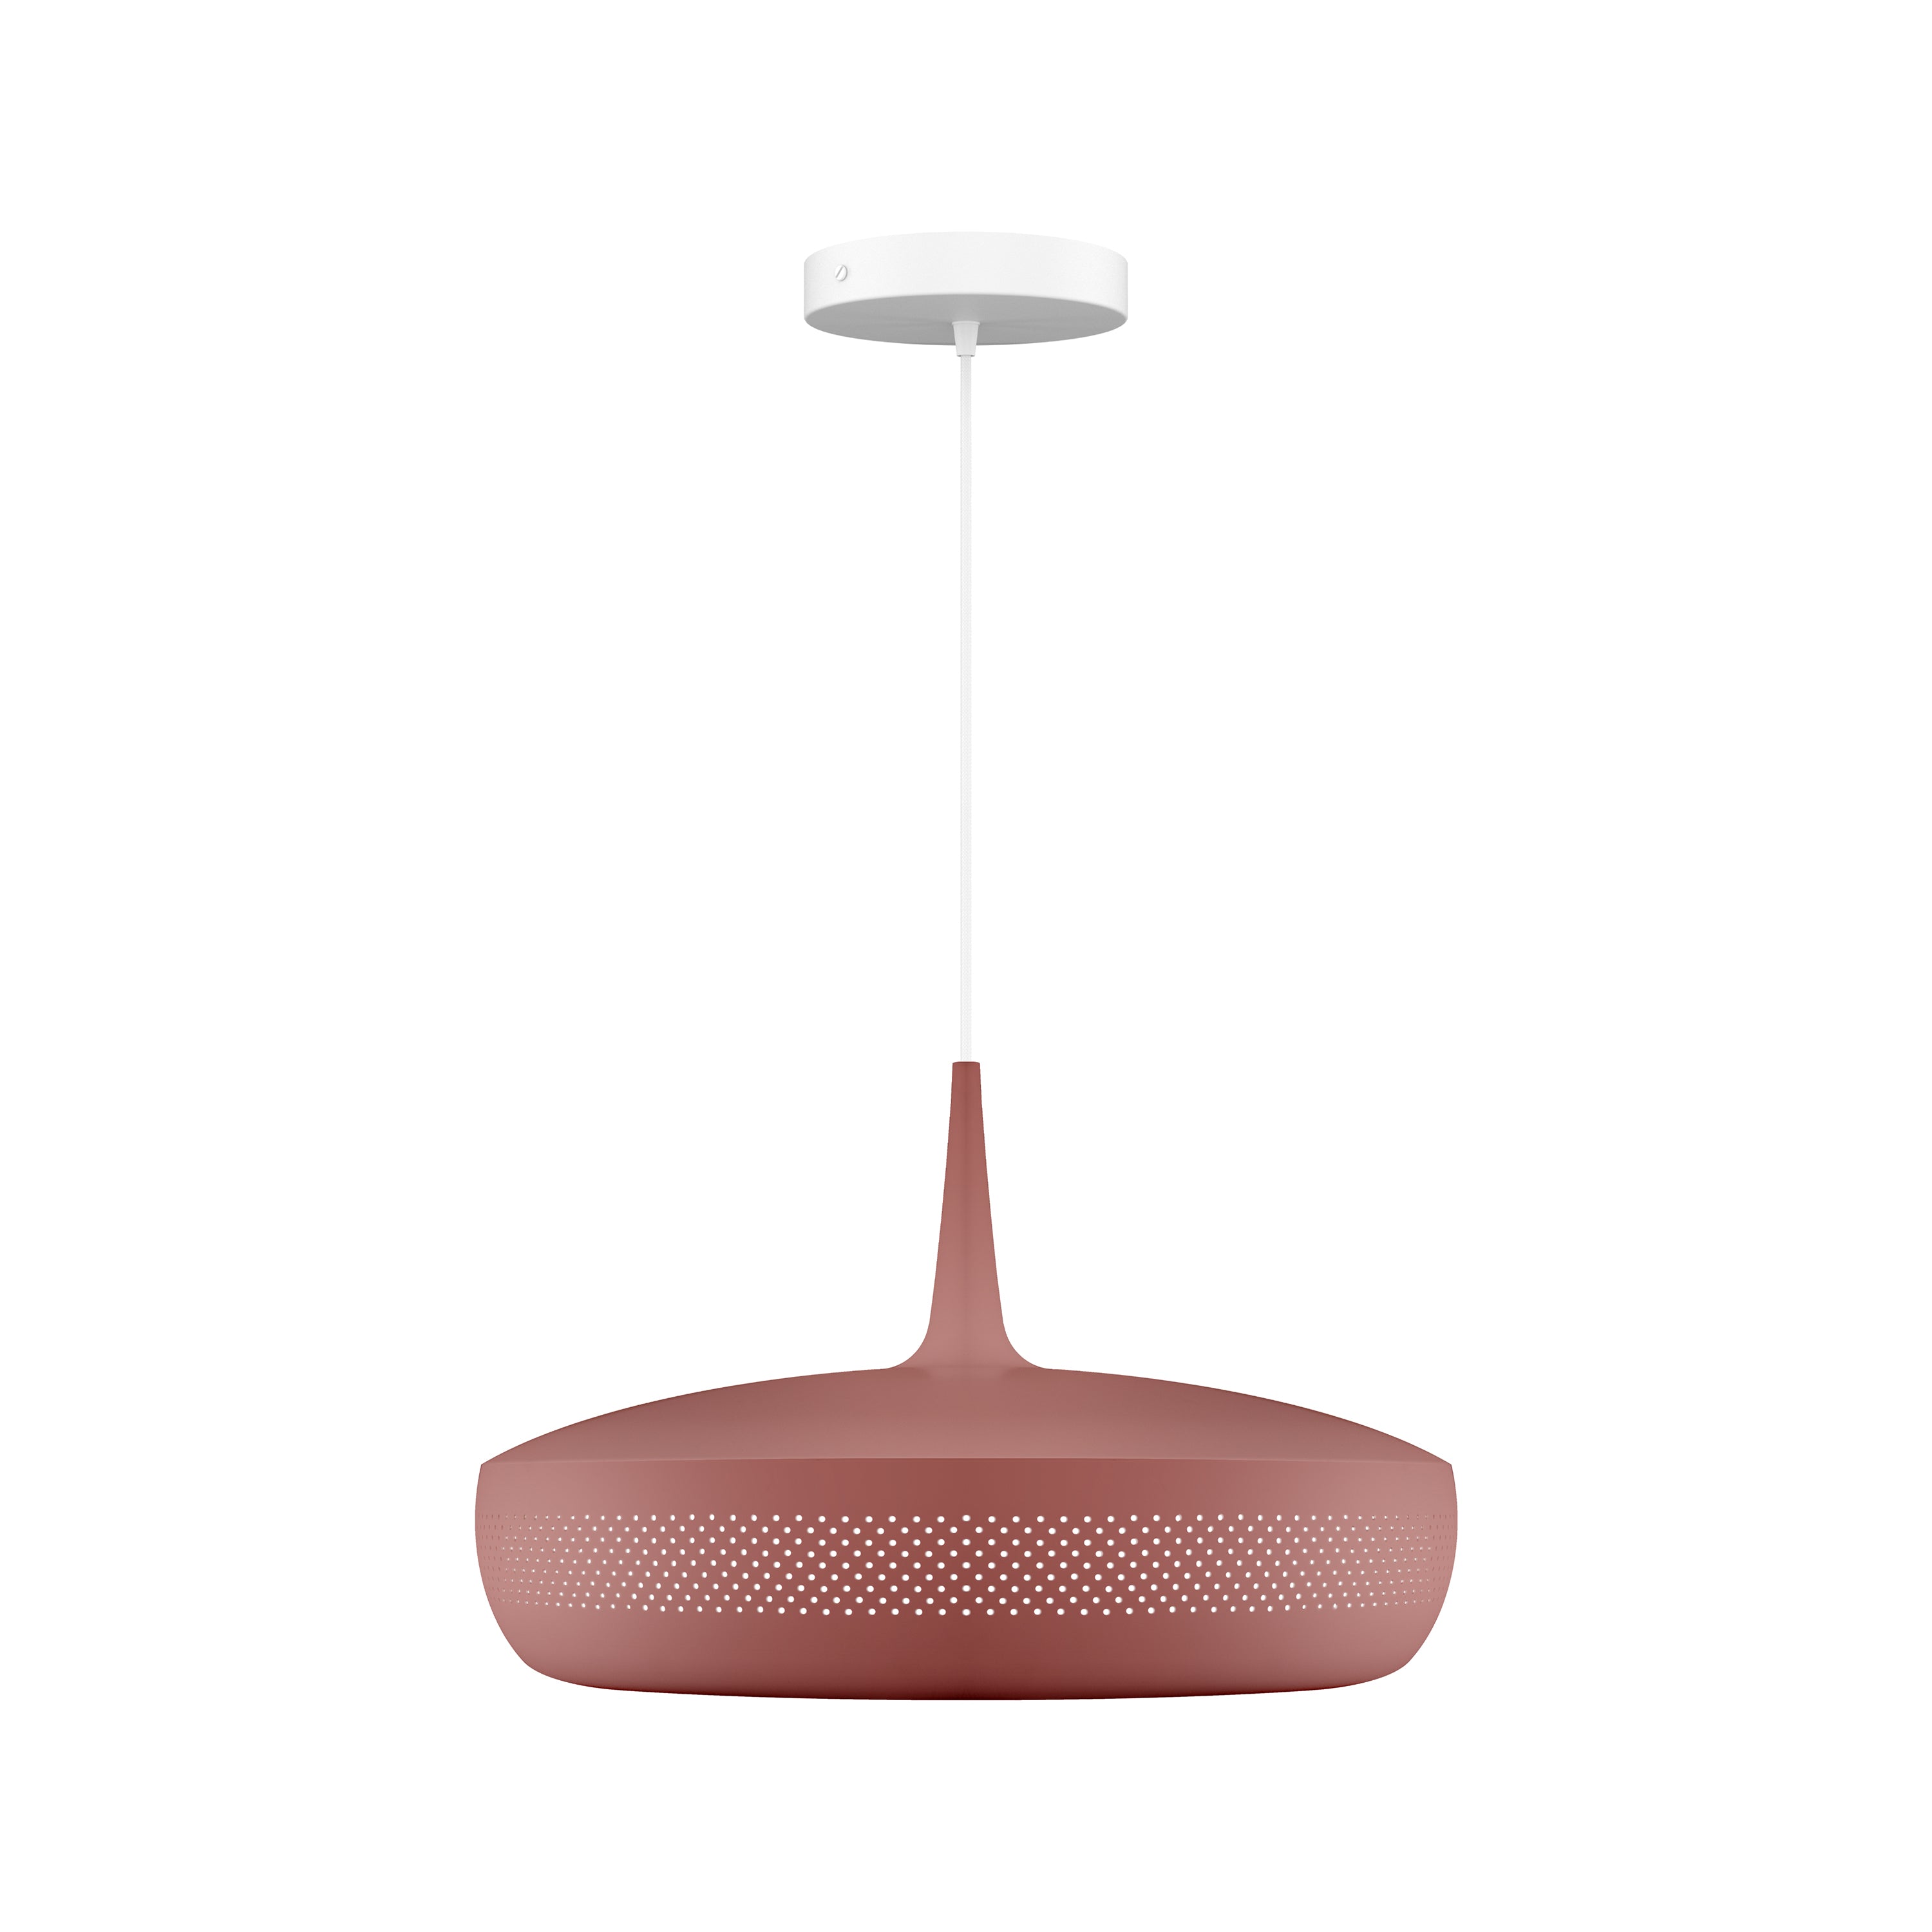 Clava Dine Pendant: Red Earth + White + Canopy